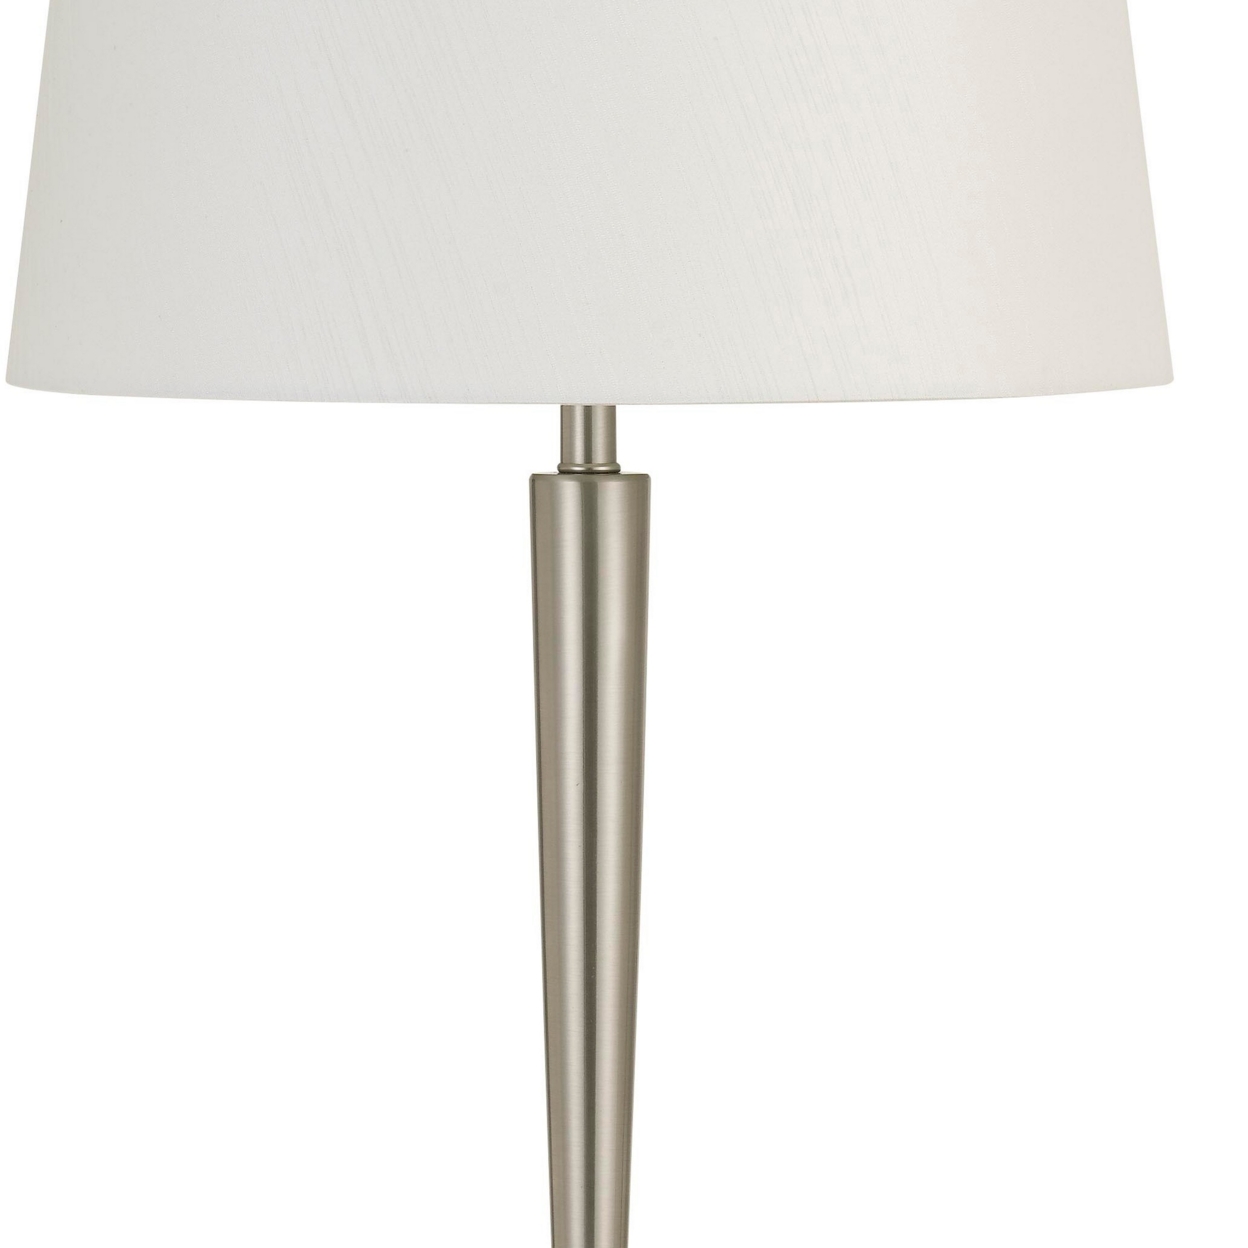 150W Metal Table Lamp With Oval Shade And 2 USB Outlets, White And Silver- Saltoro Sherpi